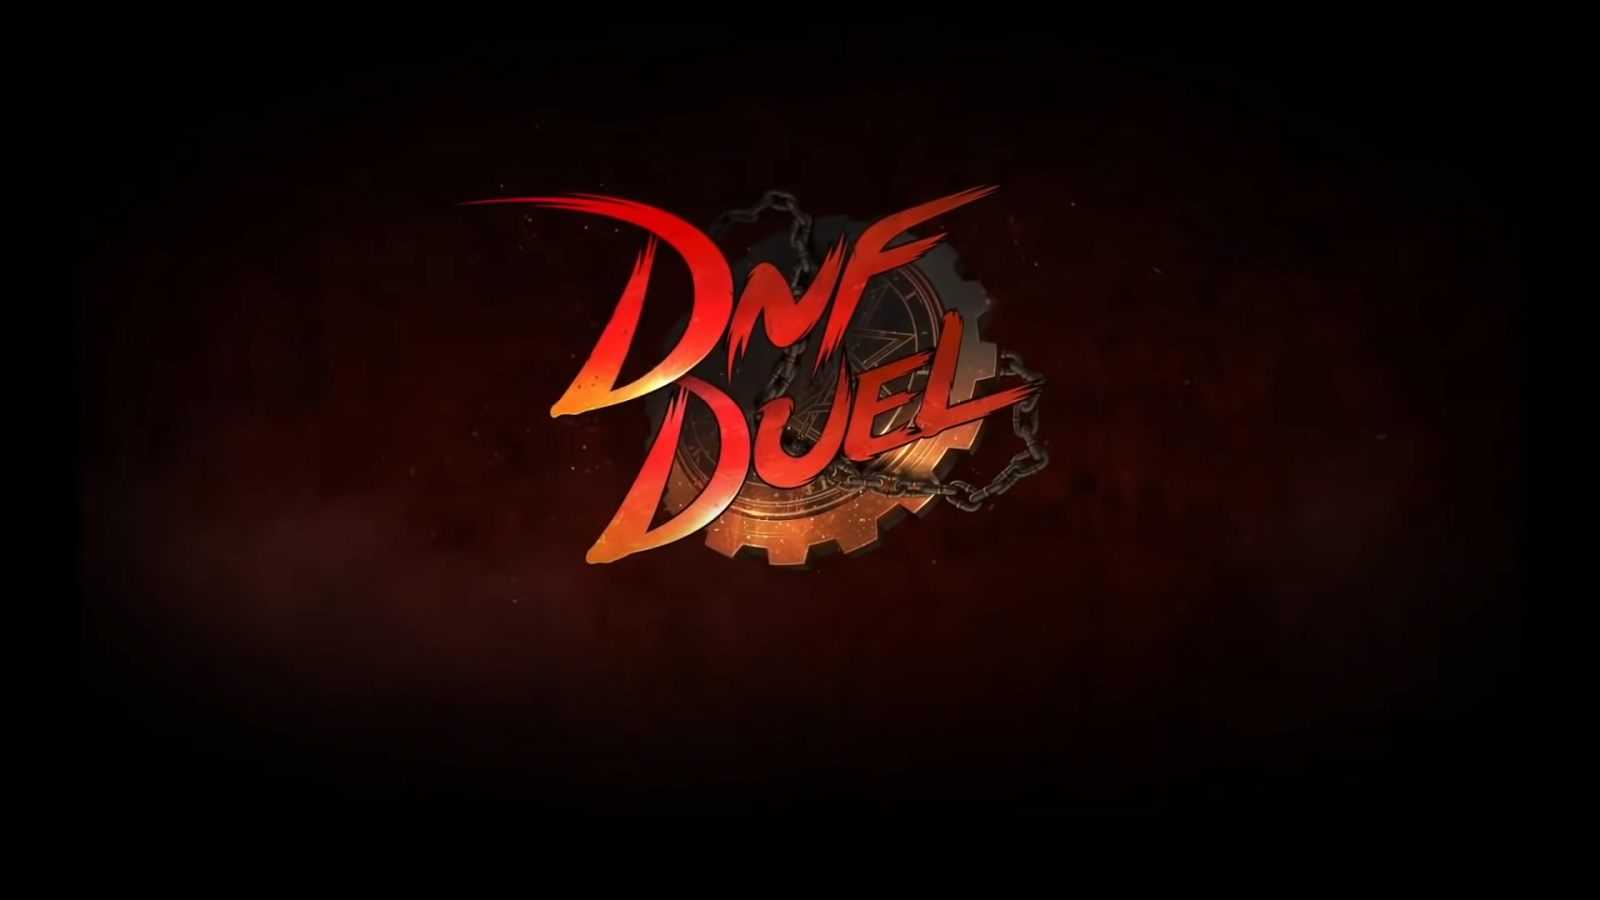 dnf duel price download